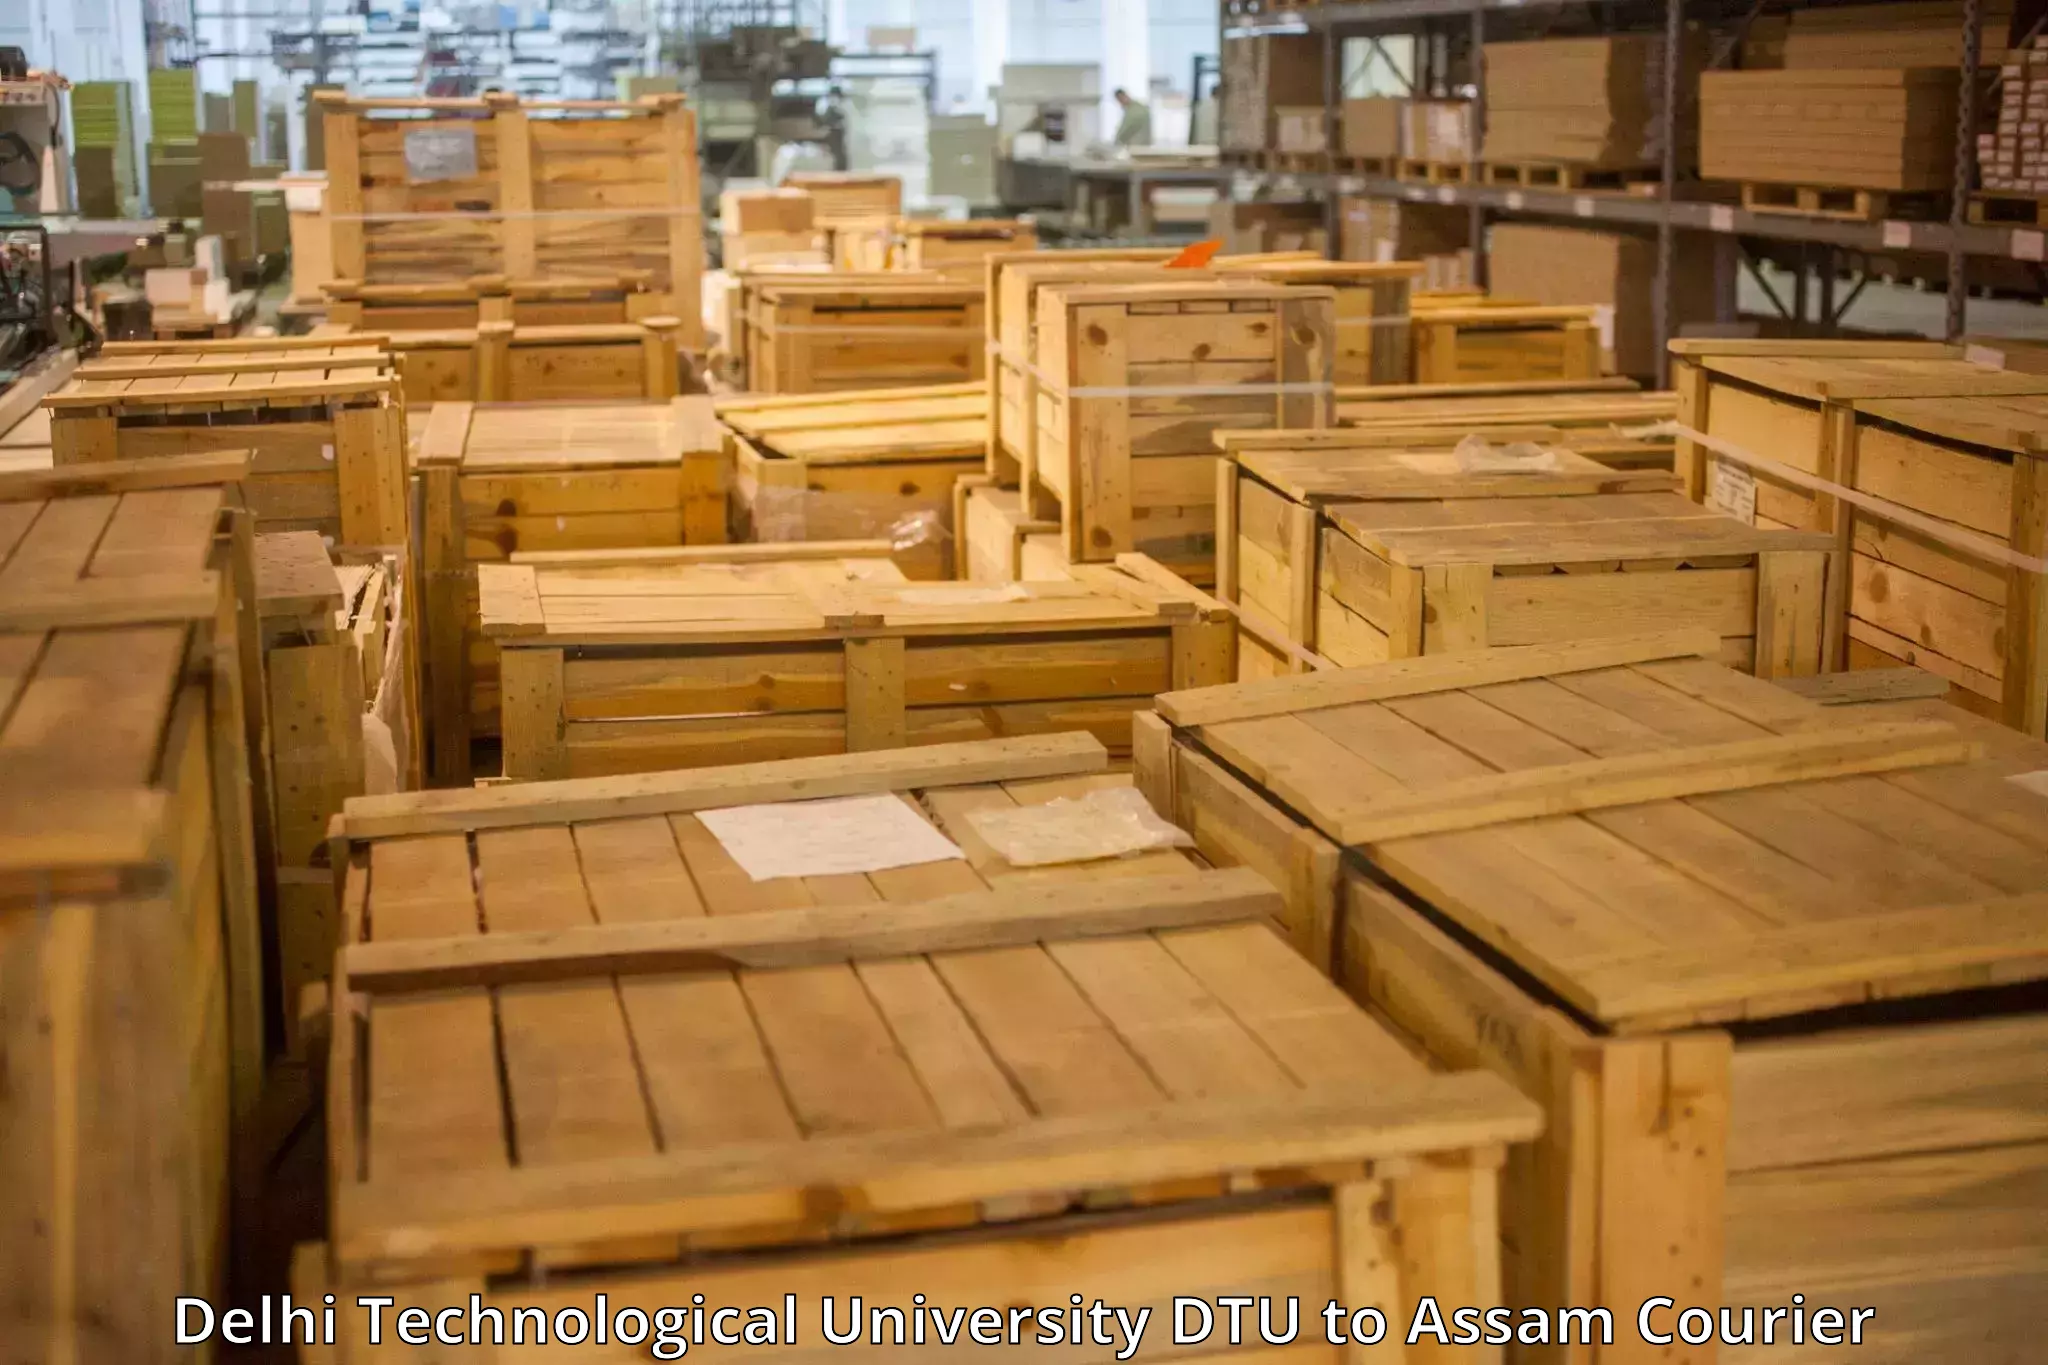 Baggage shipping quotes Delhi Technological University DTU to IIT Guwahati